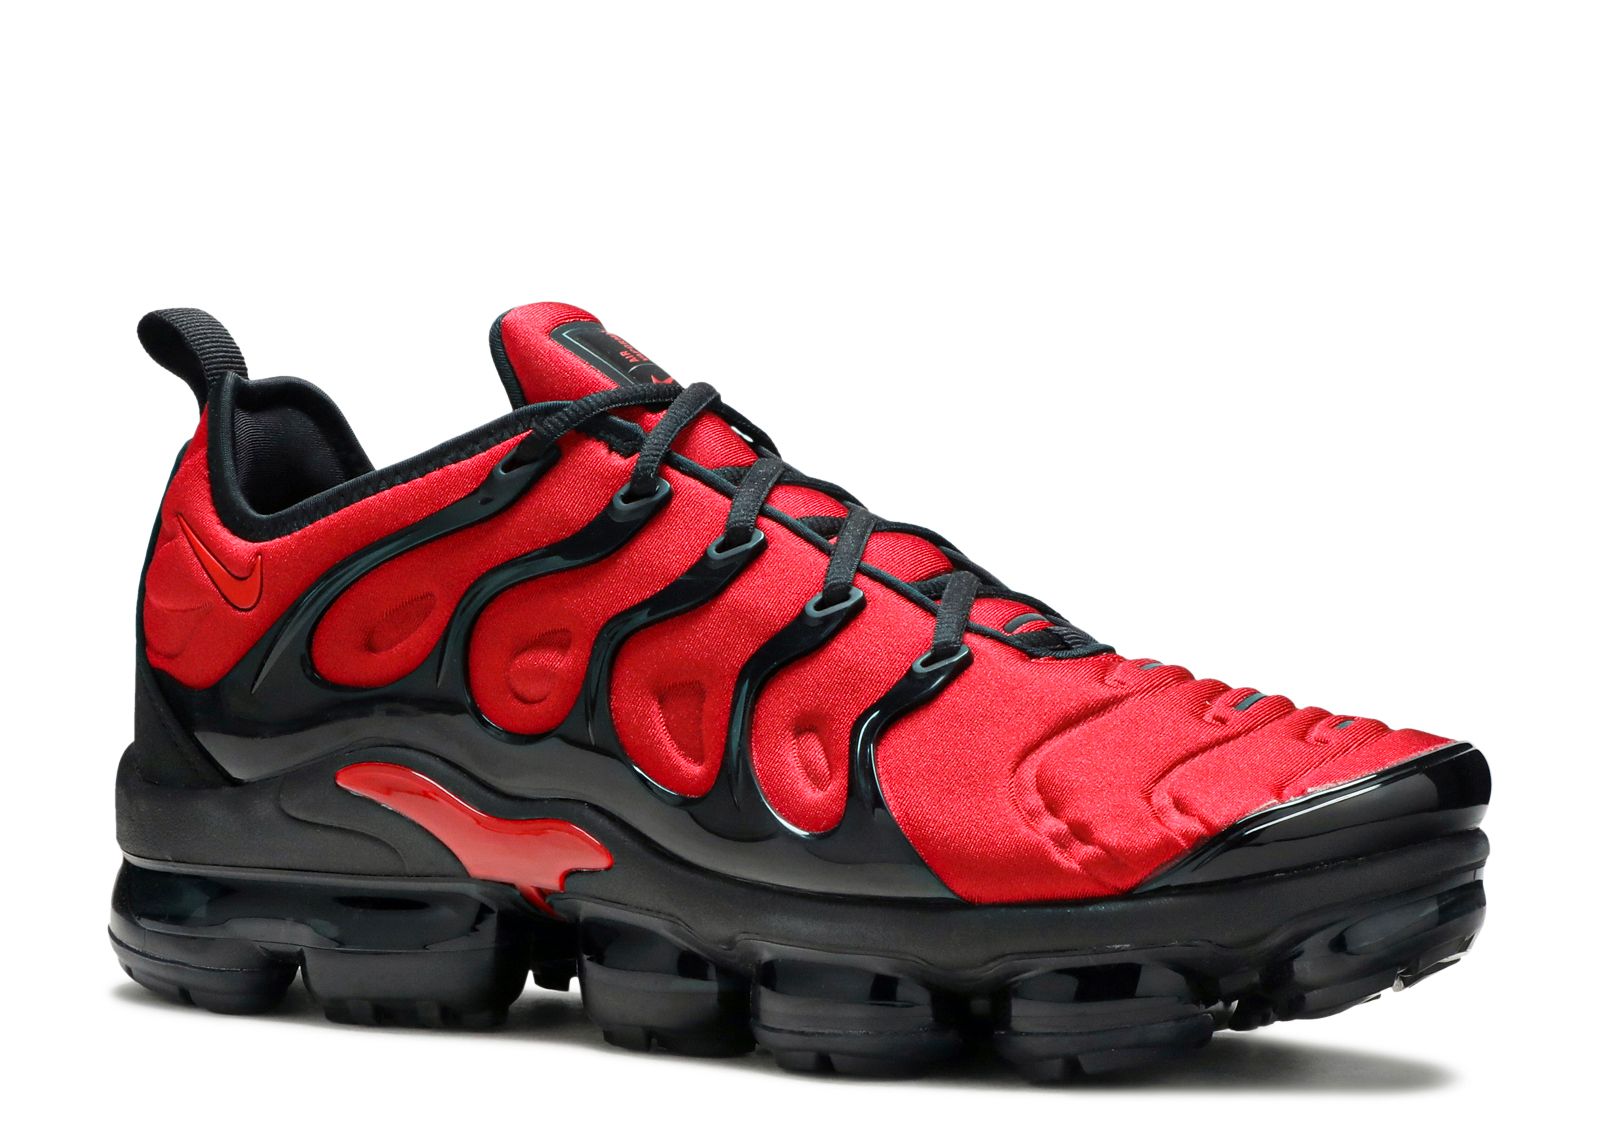 nike vapormax plus red and black